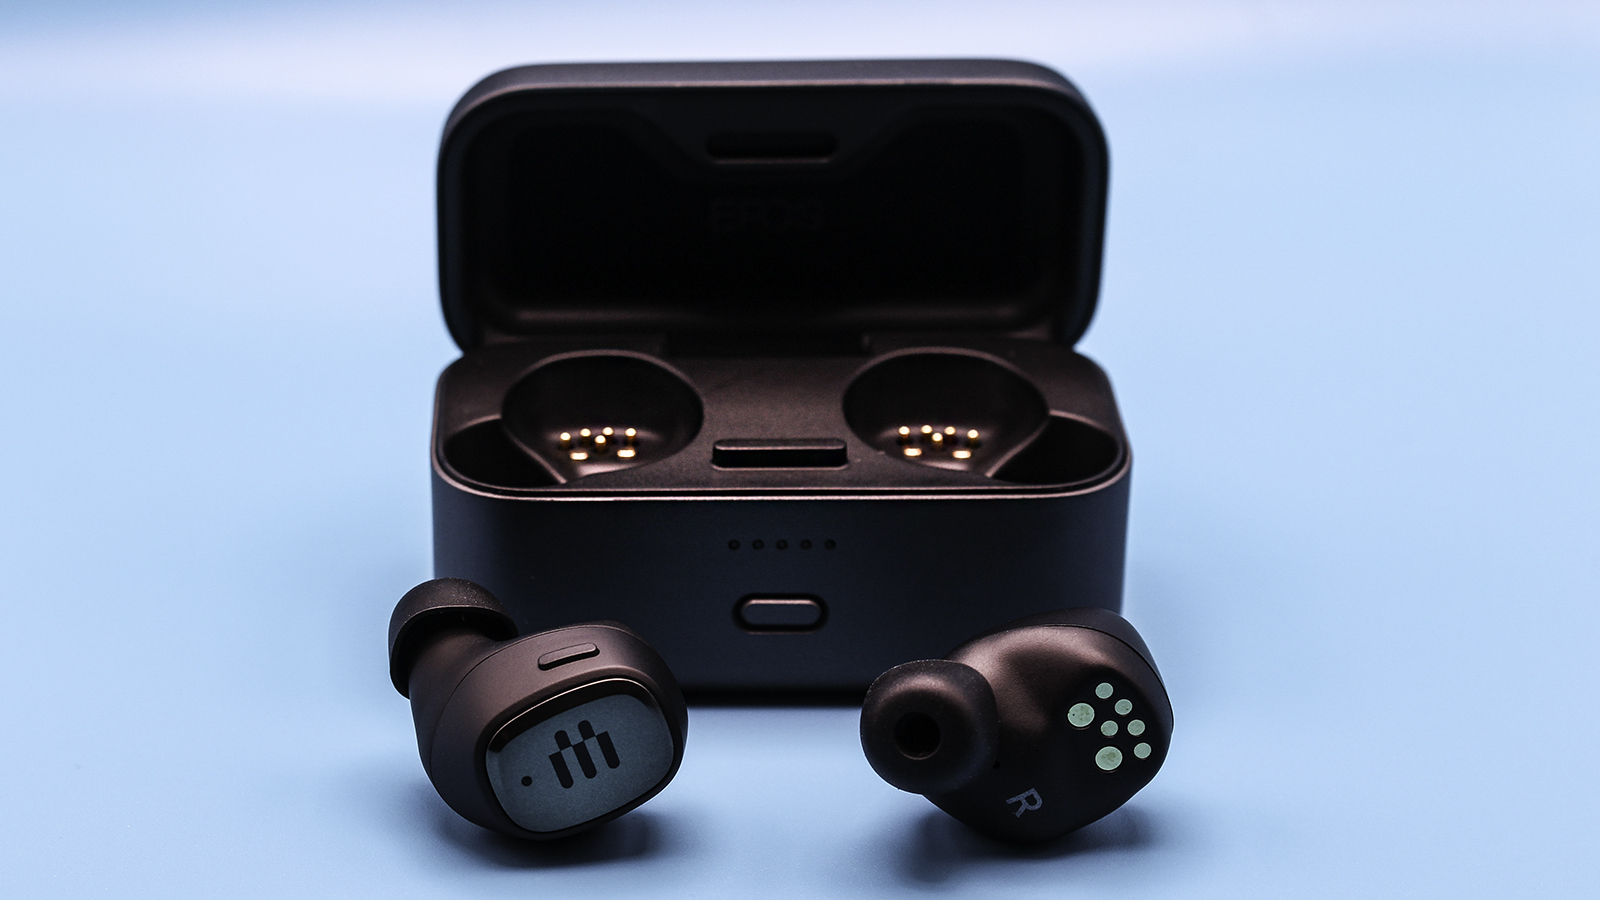 Looking for wireless gaming earbuds? The EPOS GTW 270 are next